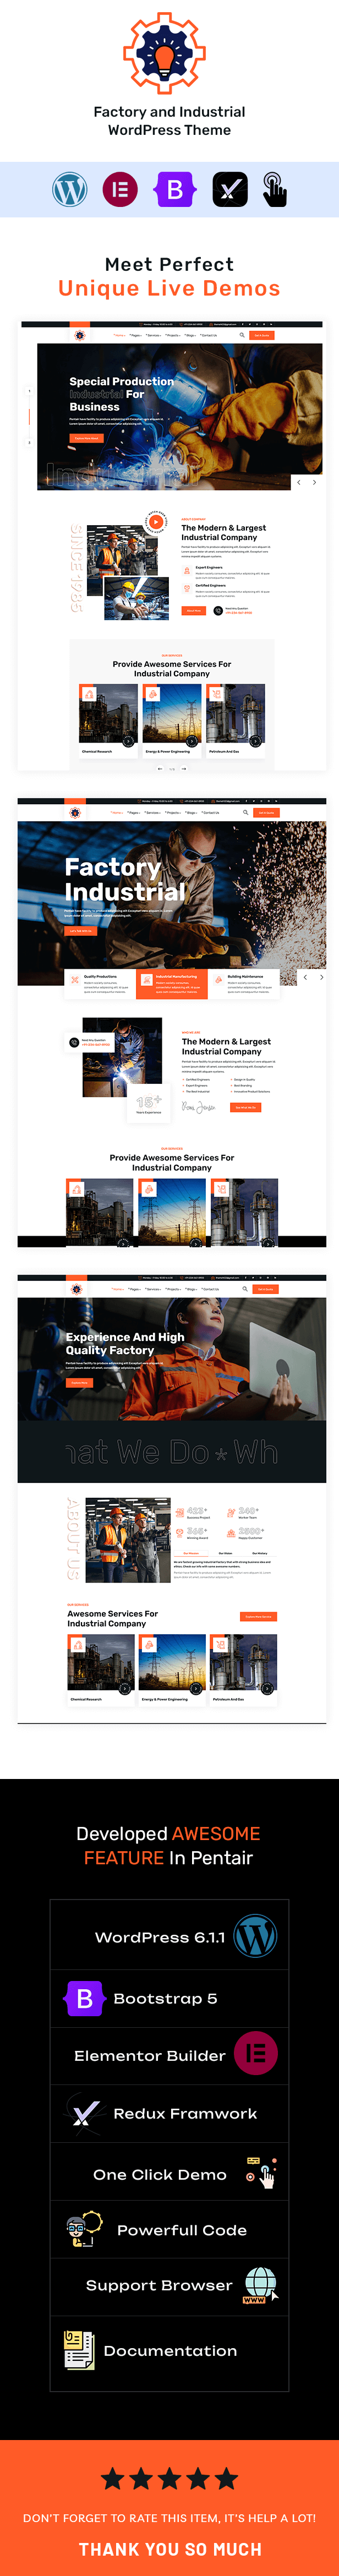 Pentair - Factory and Industrial WordPress Theme - 3